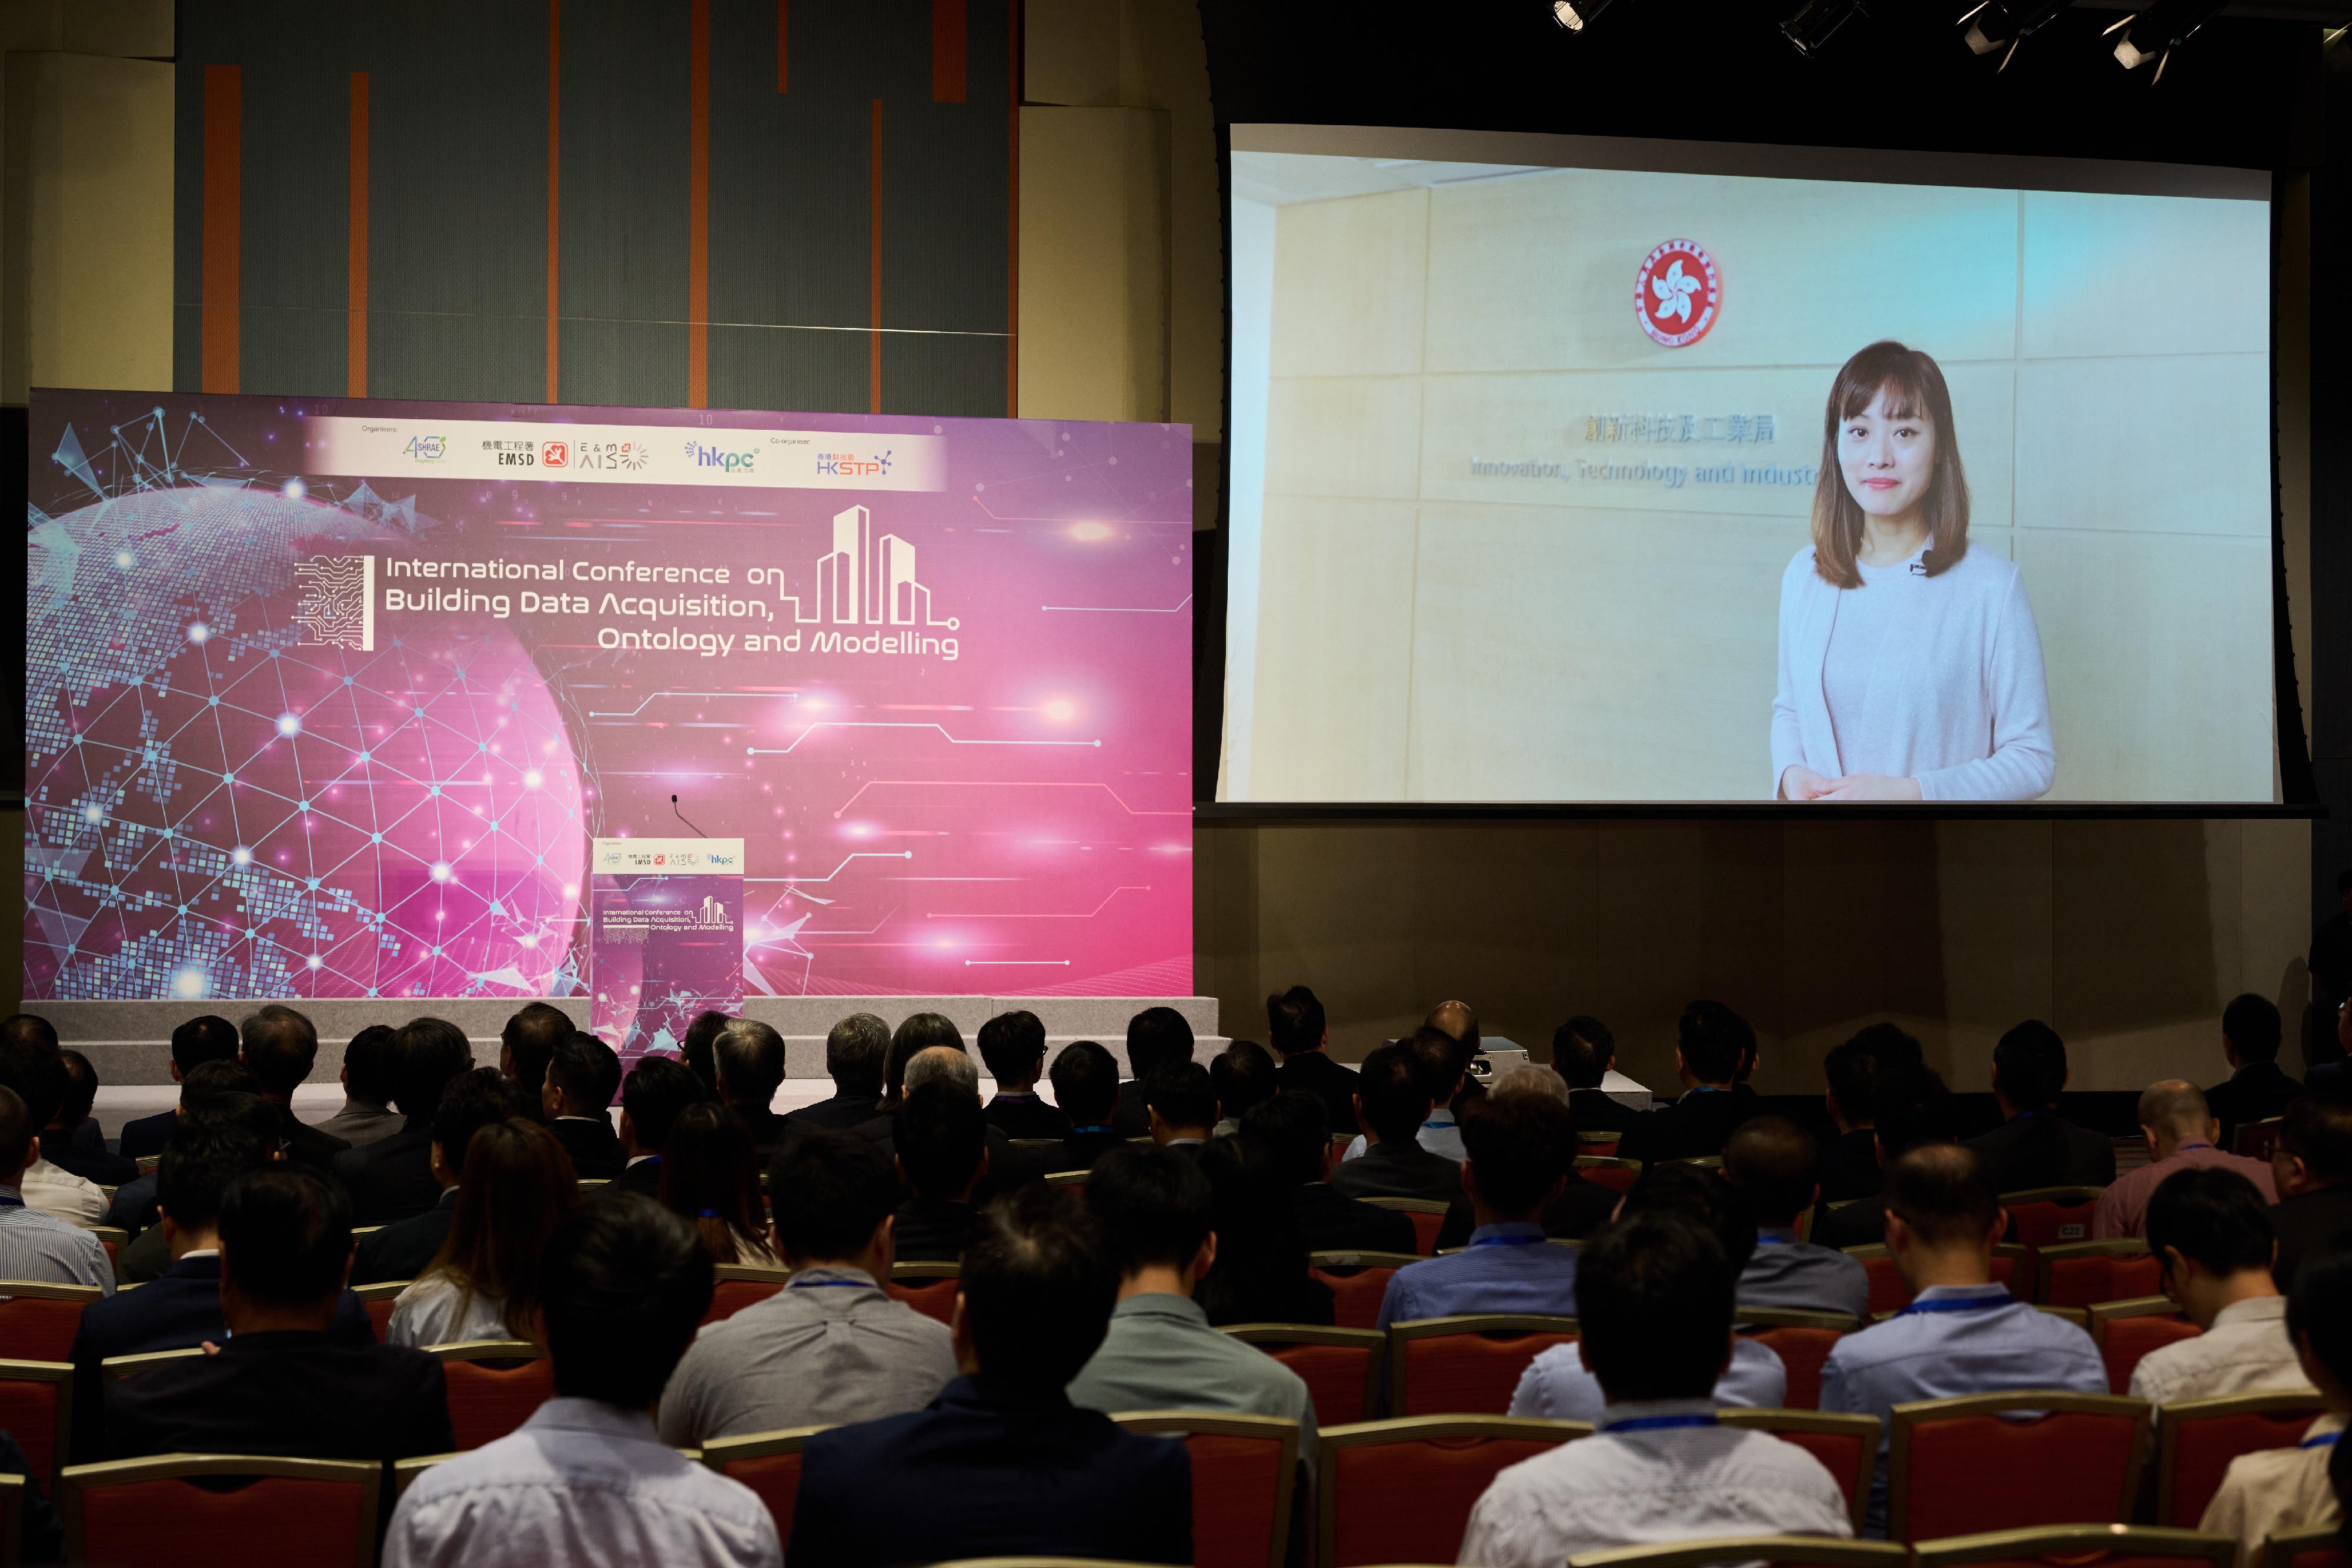 The International Conference on Building Data Acquisition, Ontology and Modeling jointly organised by the Electrical and Mechanical Services Department, the American Society of Heating, Refrigerating and Air-Conditioning Engineers Hong Kong Chapter and the Hong Kong Productivity Council concluded today (April 24). Photo shows the Under Secretary for Innovation and Technology, Ms Lillian Cheong, addressing the conference virtually.